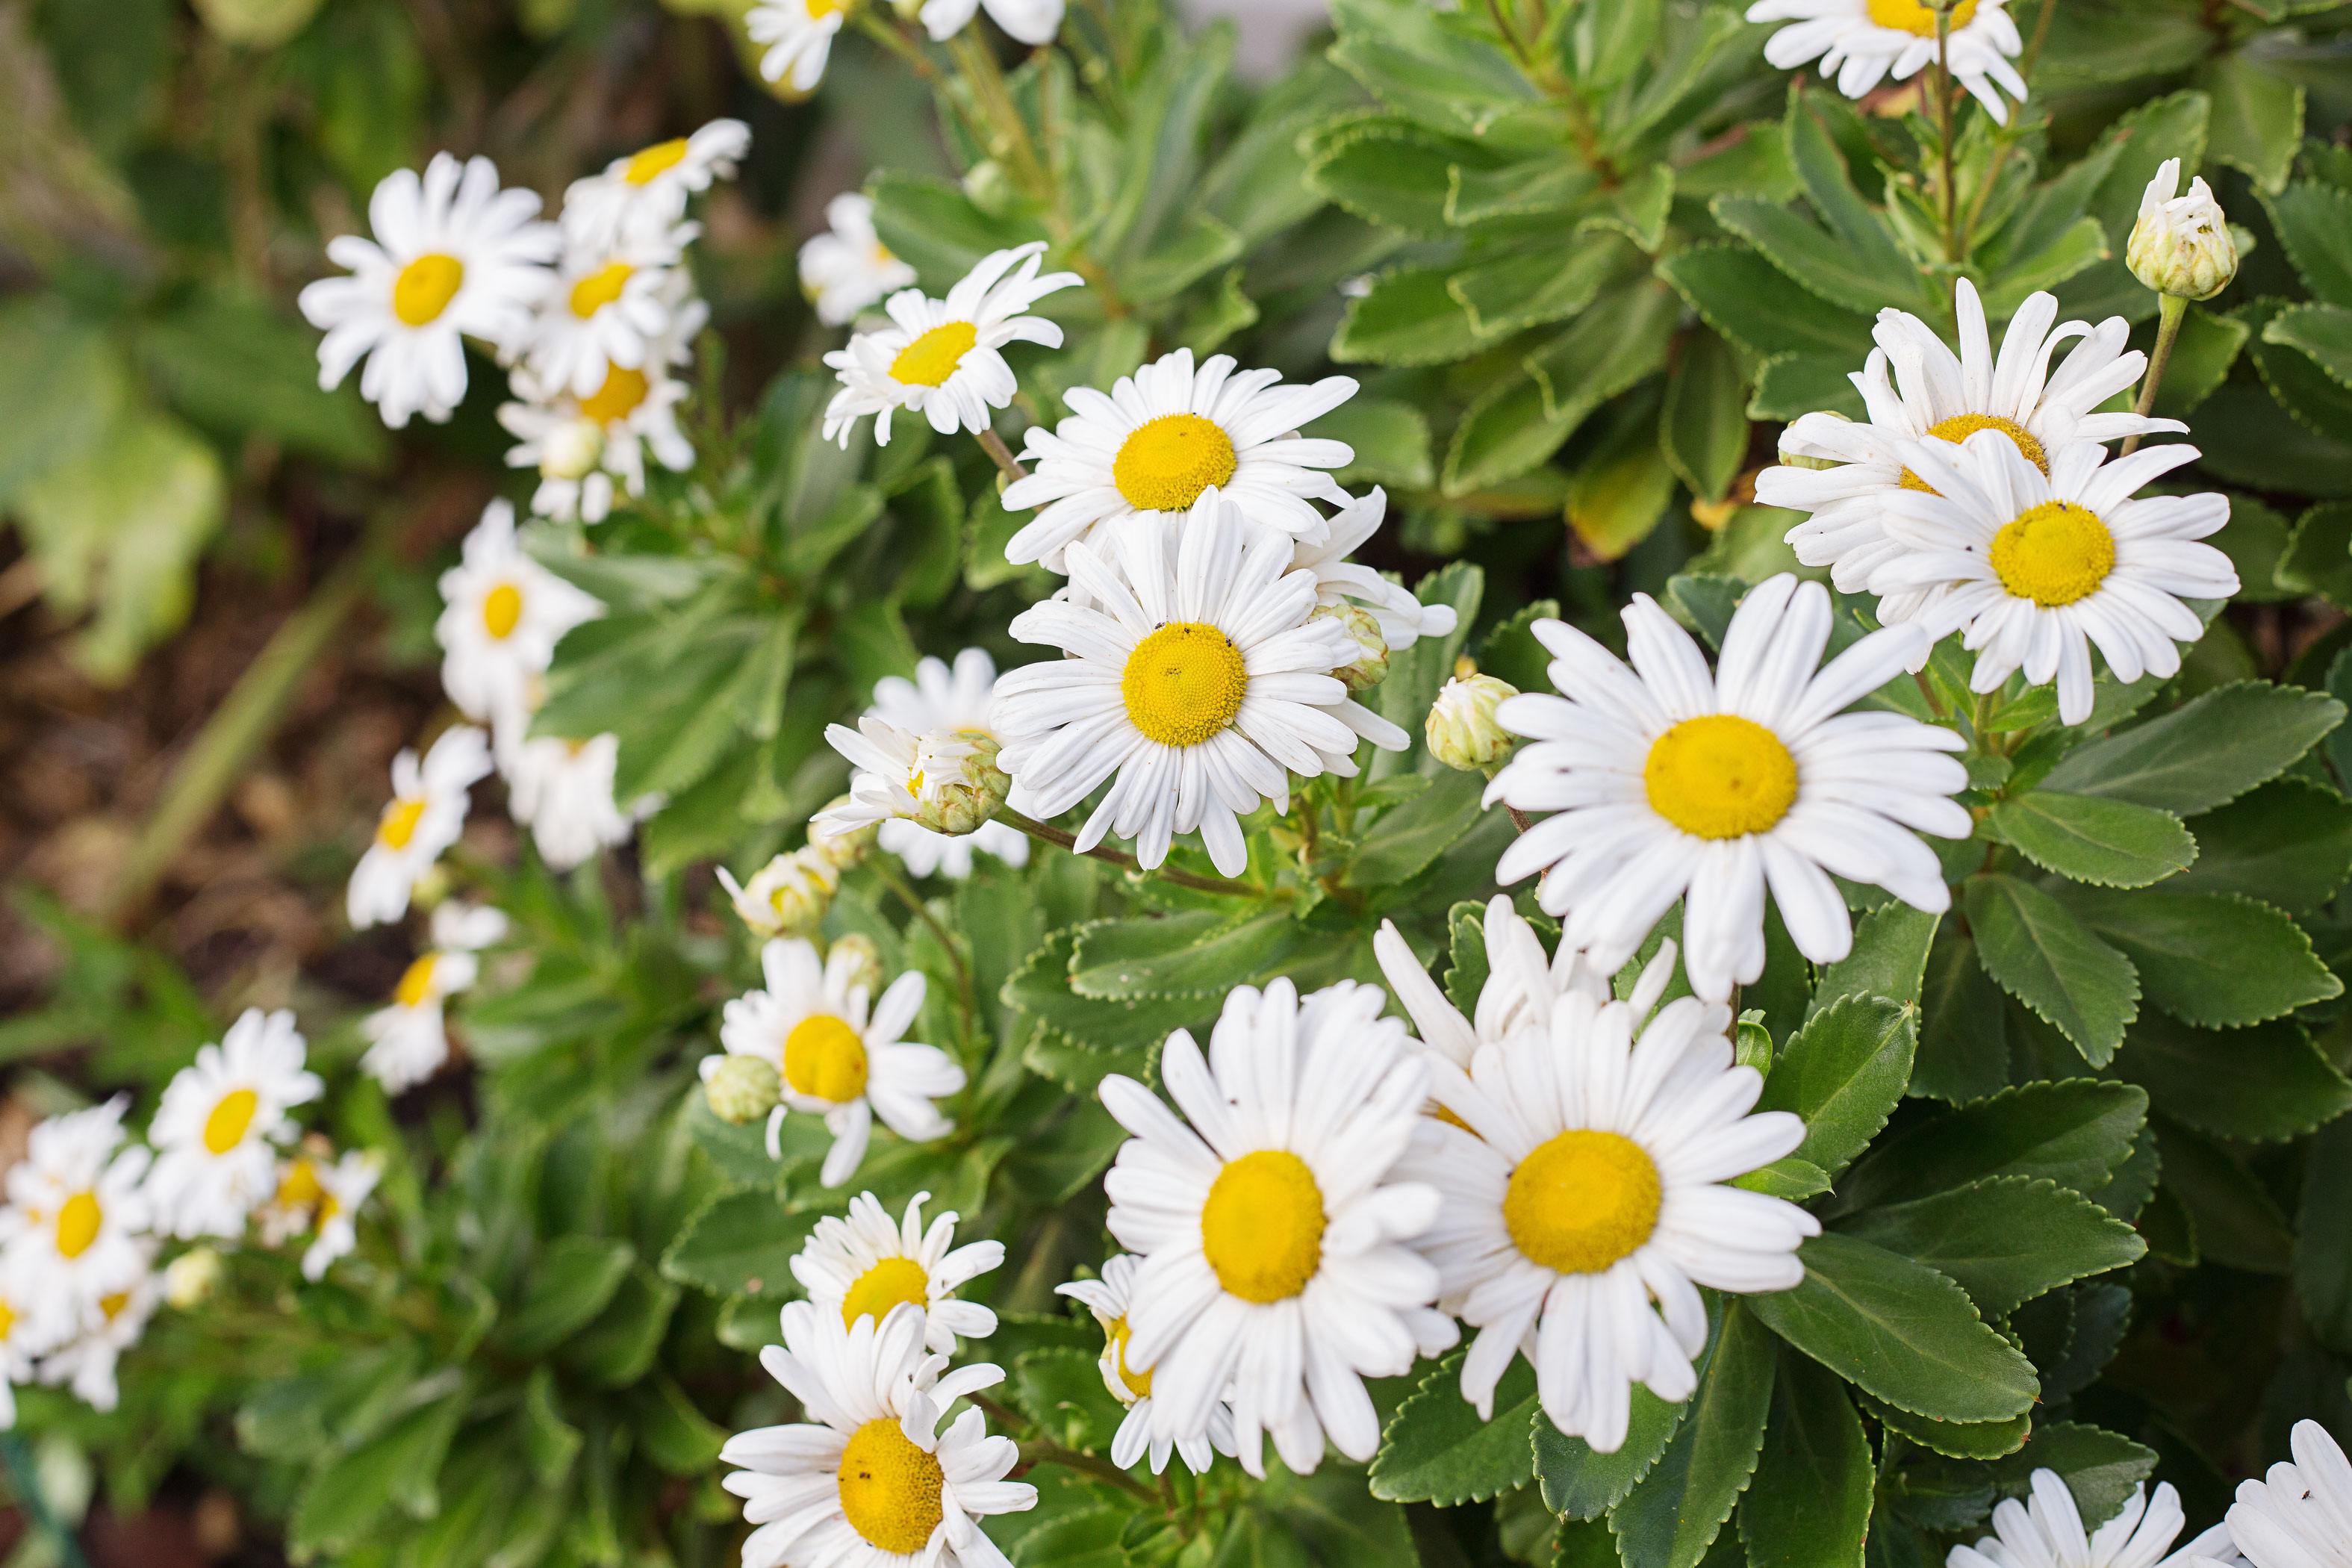 How to Grow and Care for Montauk Daisies, Also Known as Nippon Daisies